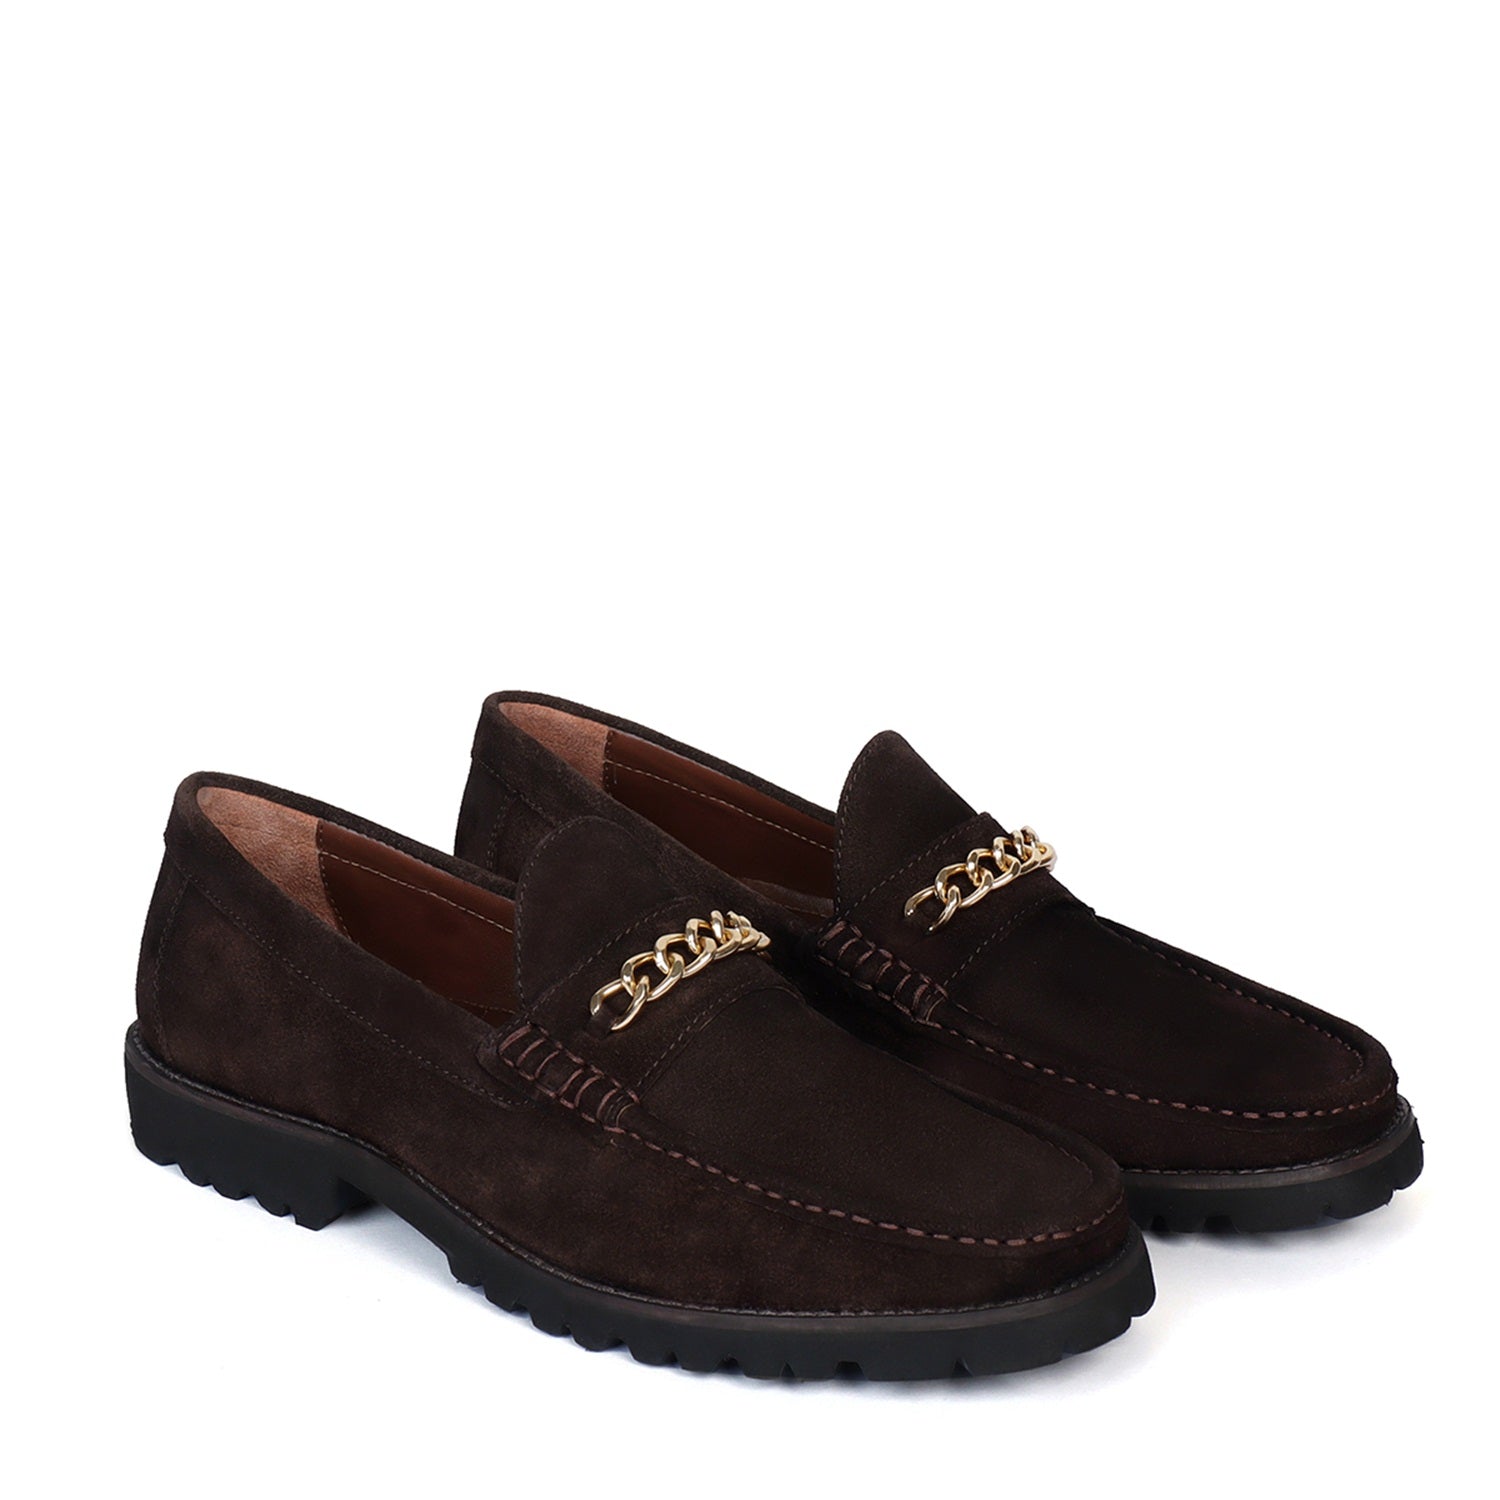 Light Weight Lug Sole Loafers in Dark Brown Suede Leather with Golden Chain